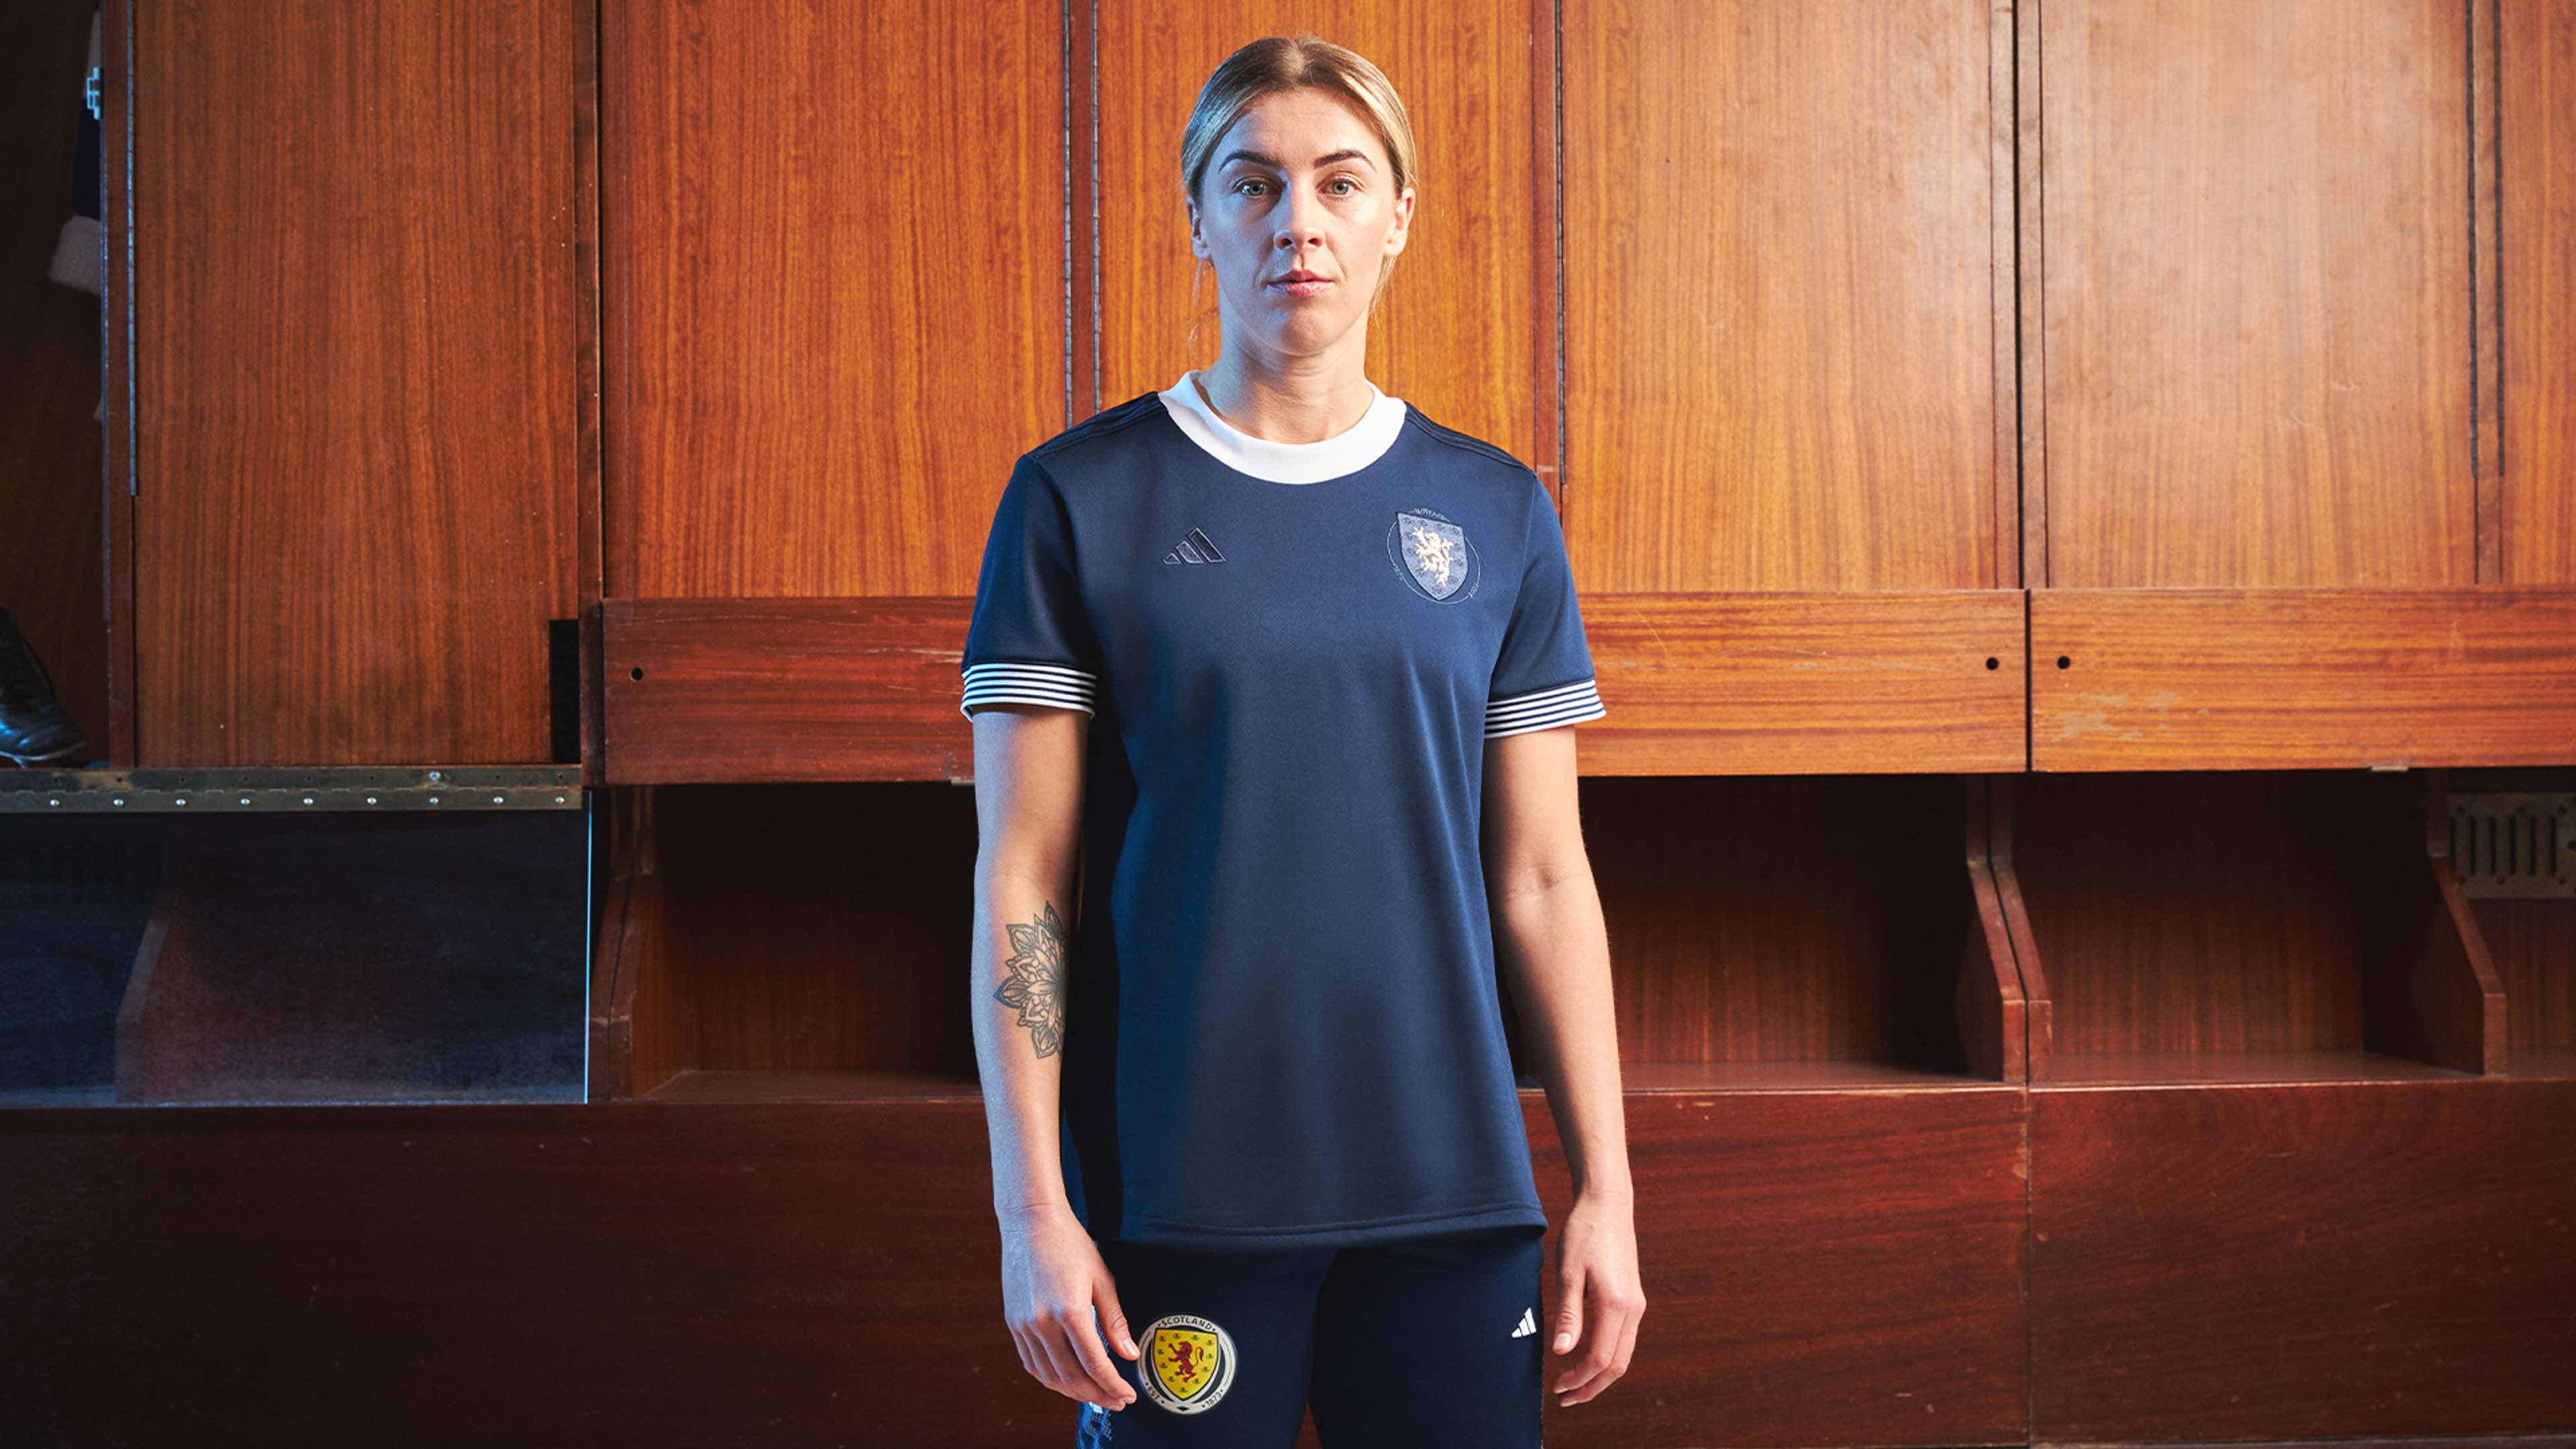 Scotland 2023 150th anniversary football shirt: Price & where to buy  special edition adidas jersey